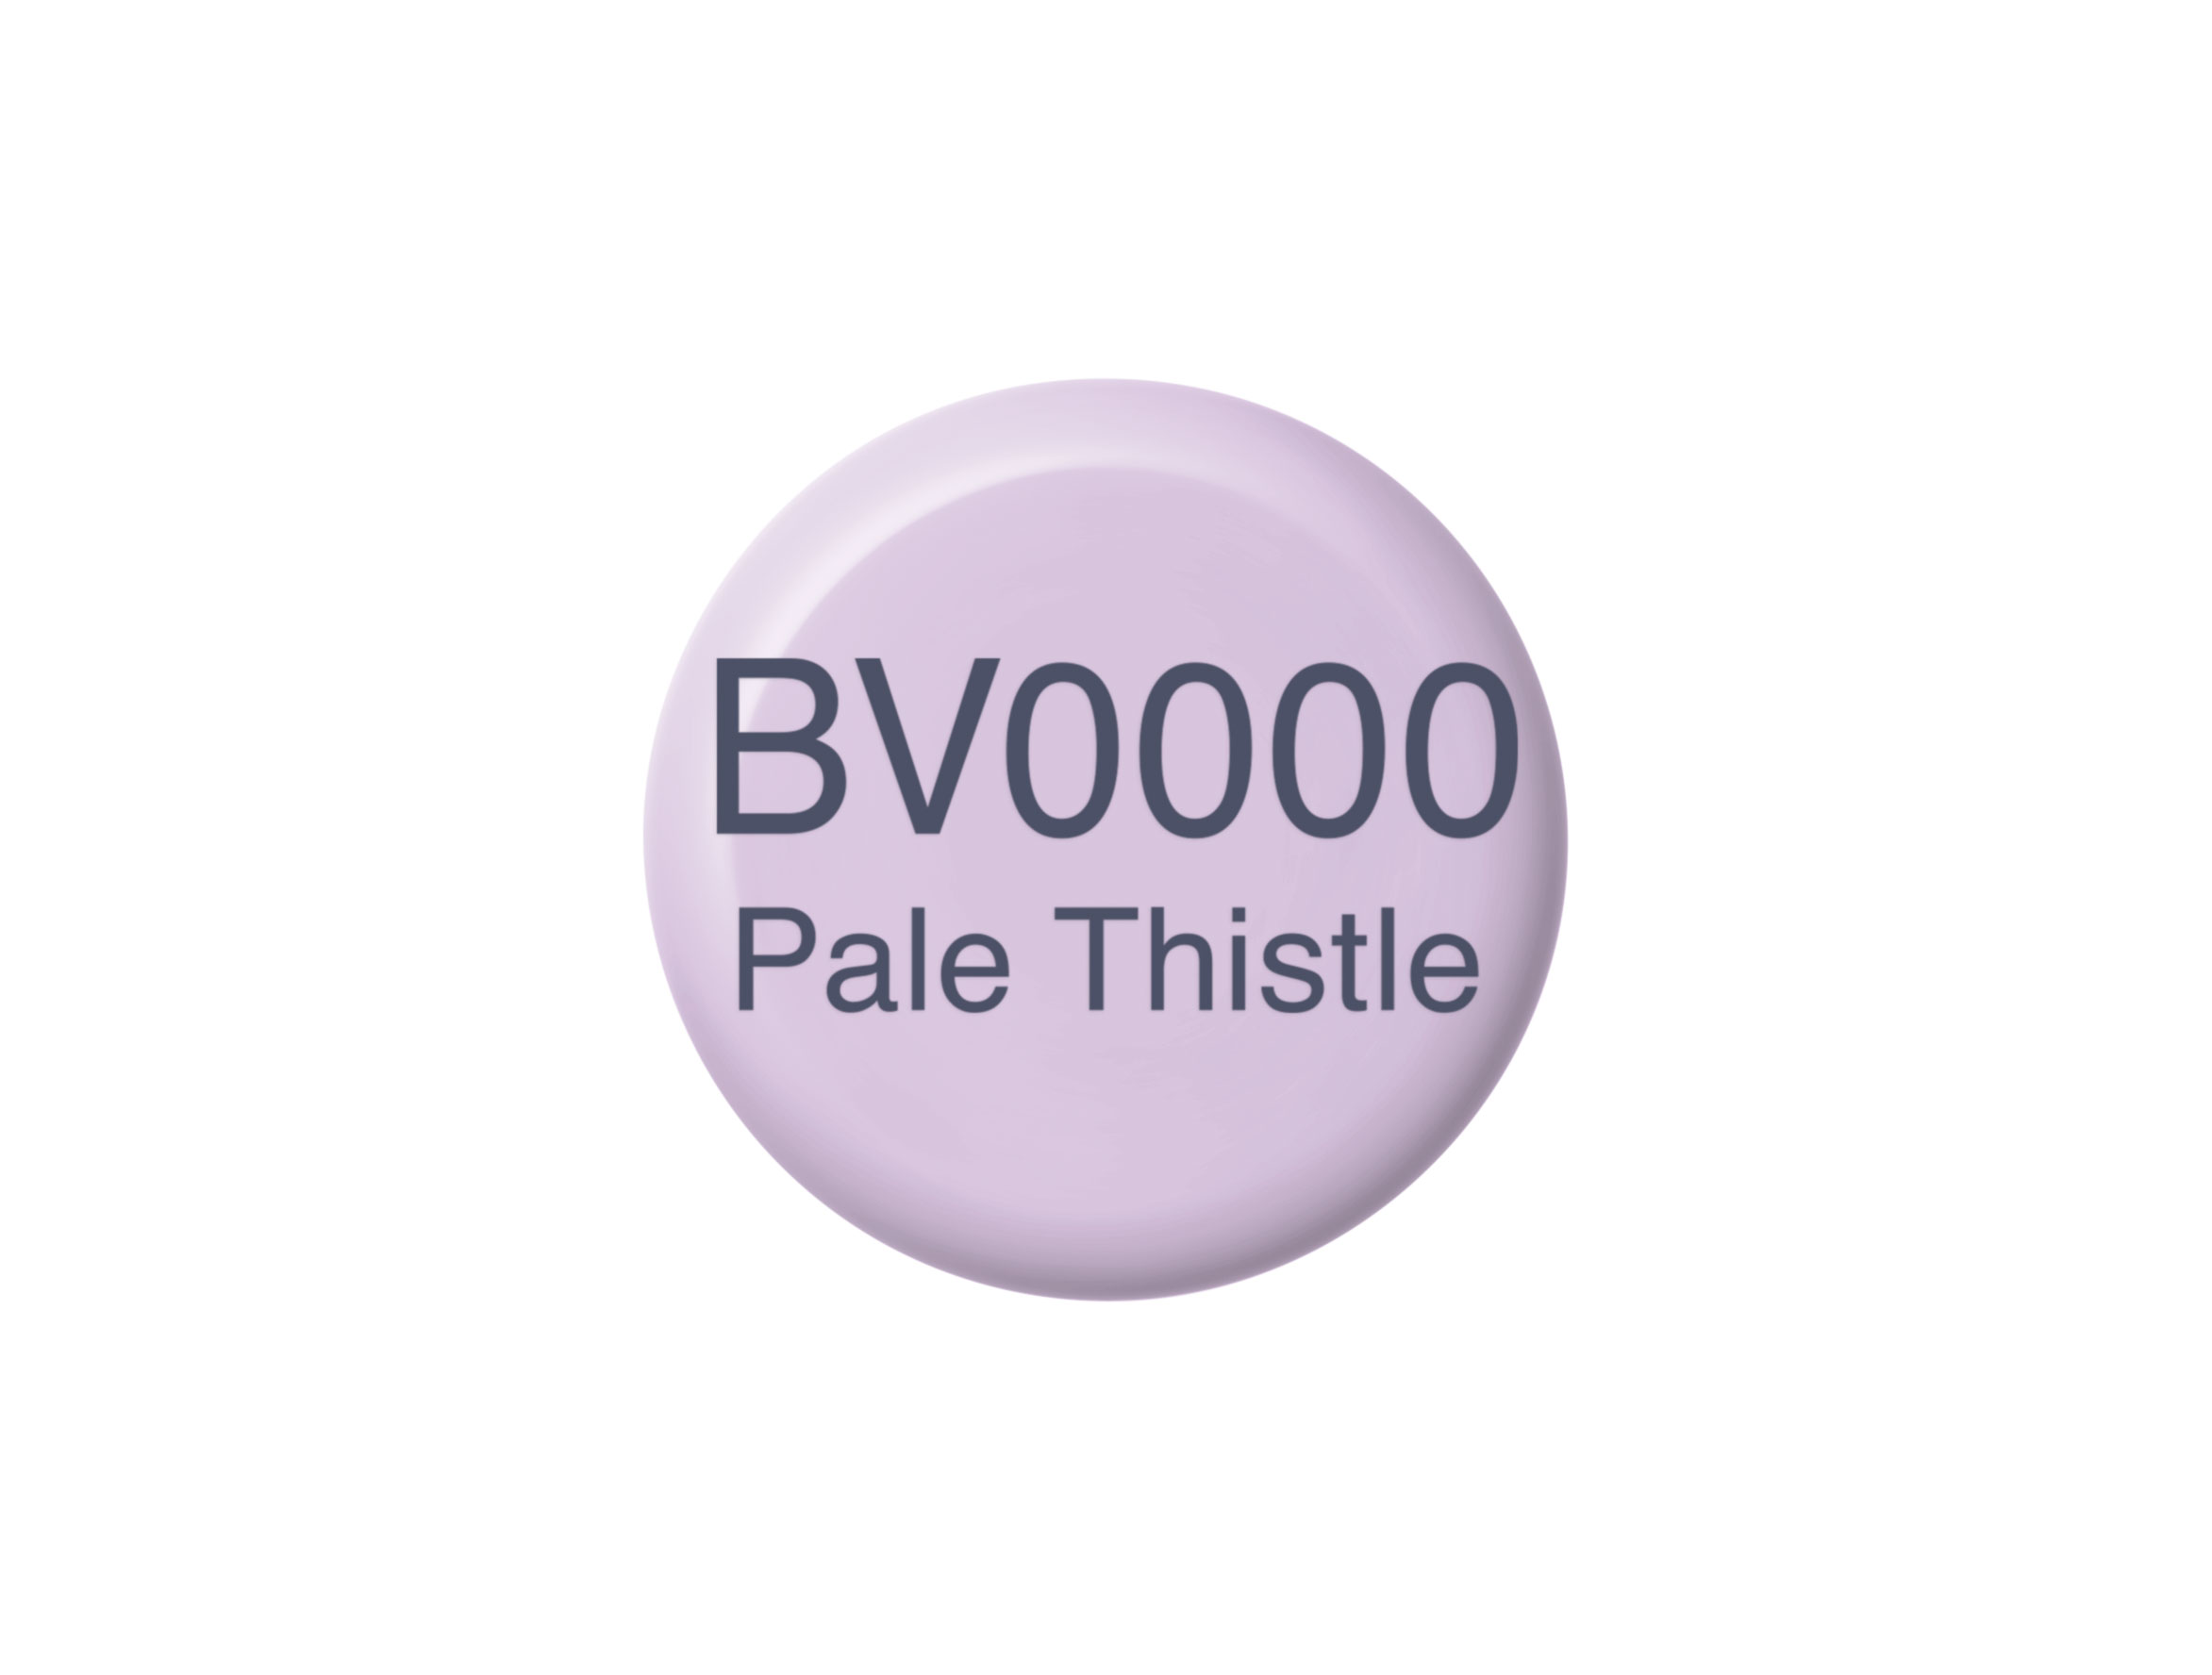 Copic Ink BV0000 Pale Thistle